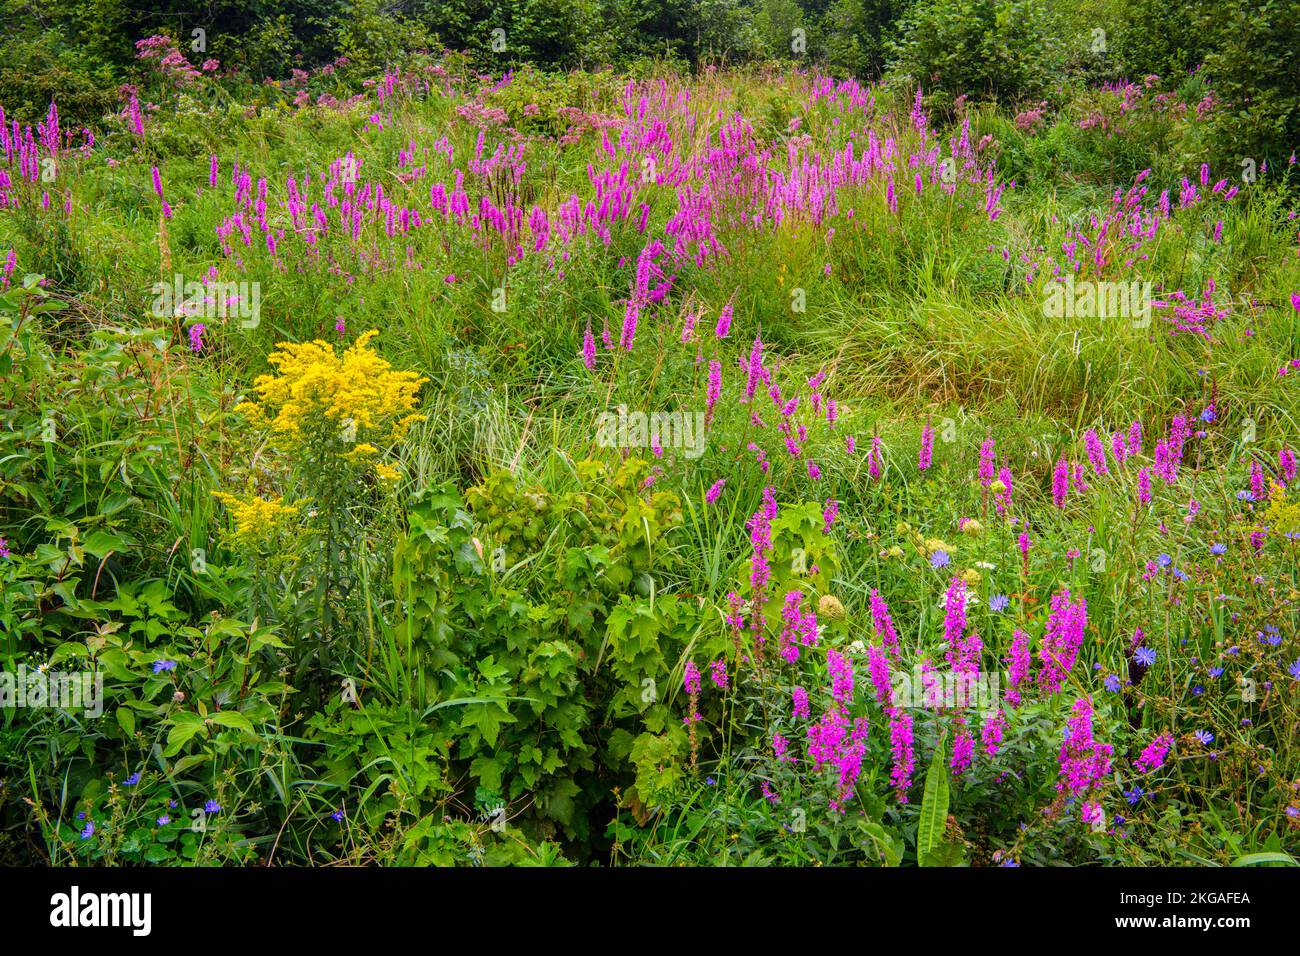 Native wildflowers and invasive purple loosestrife in late summer, Green Bay, Manitoulin Island, Ontario, Canada Stock Photo